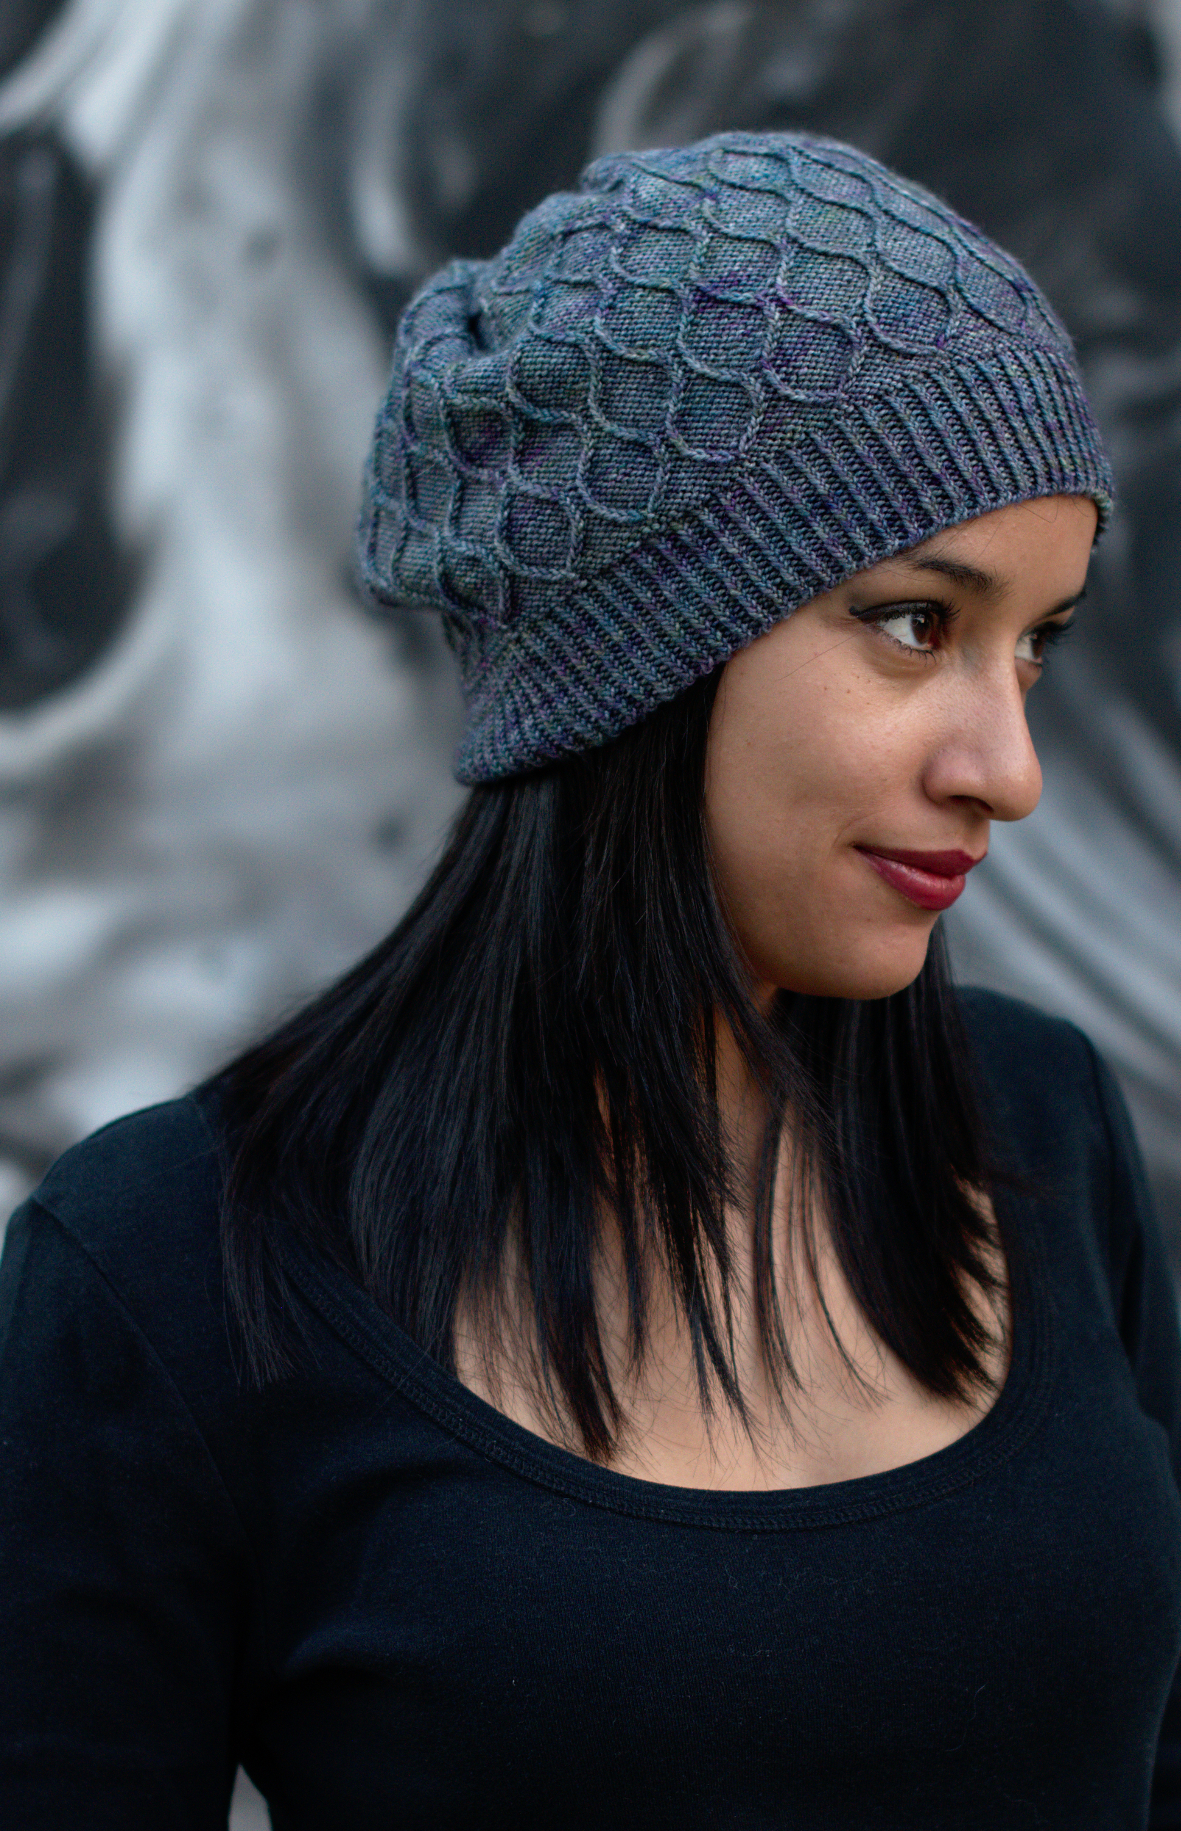 Filigree slouch hand knitting hat pattern for sock weight yarn